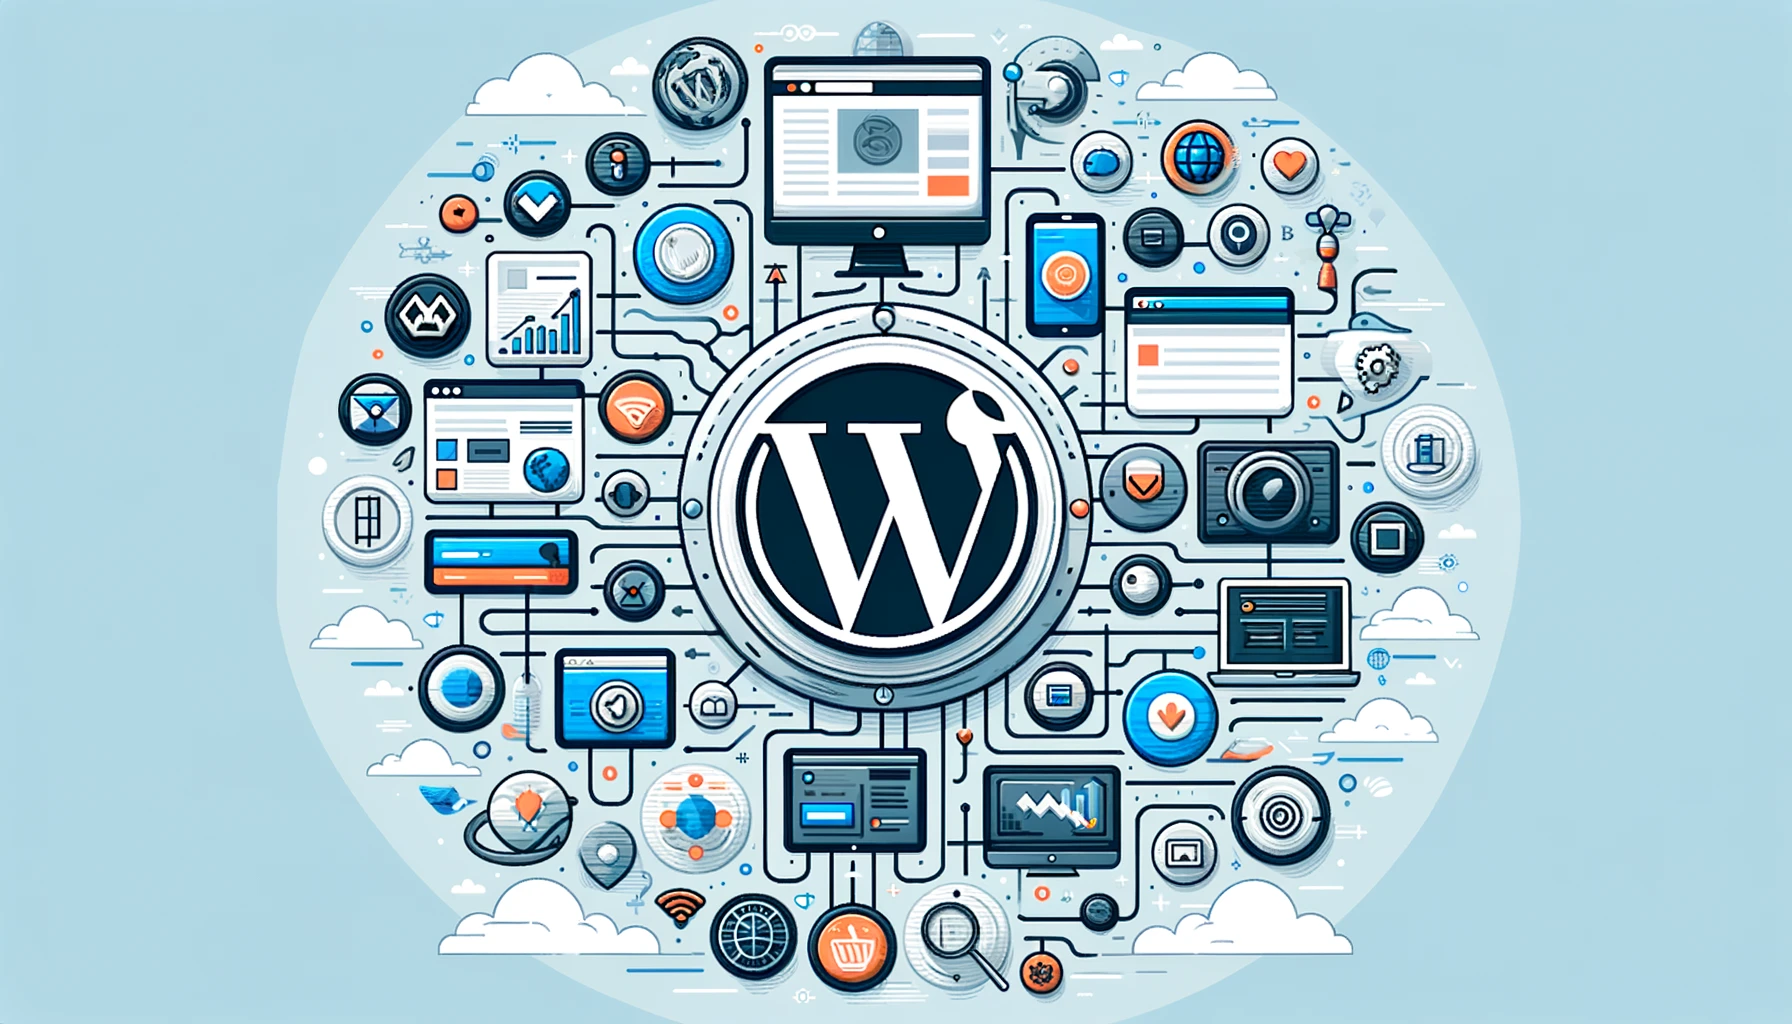 Featured image for “The Role of WordPress in Your Digital Marketing Ecosystem”